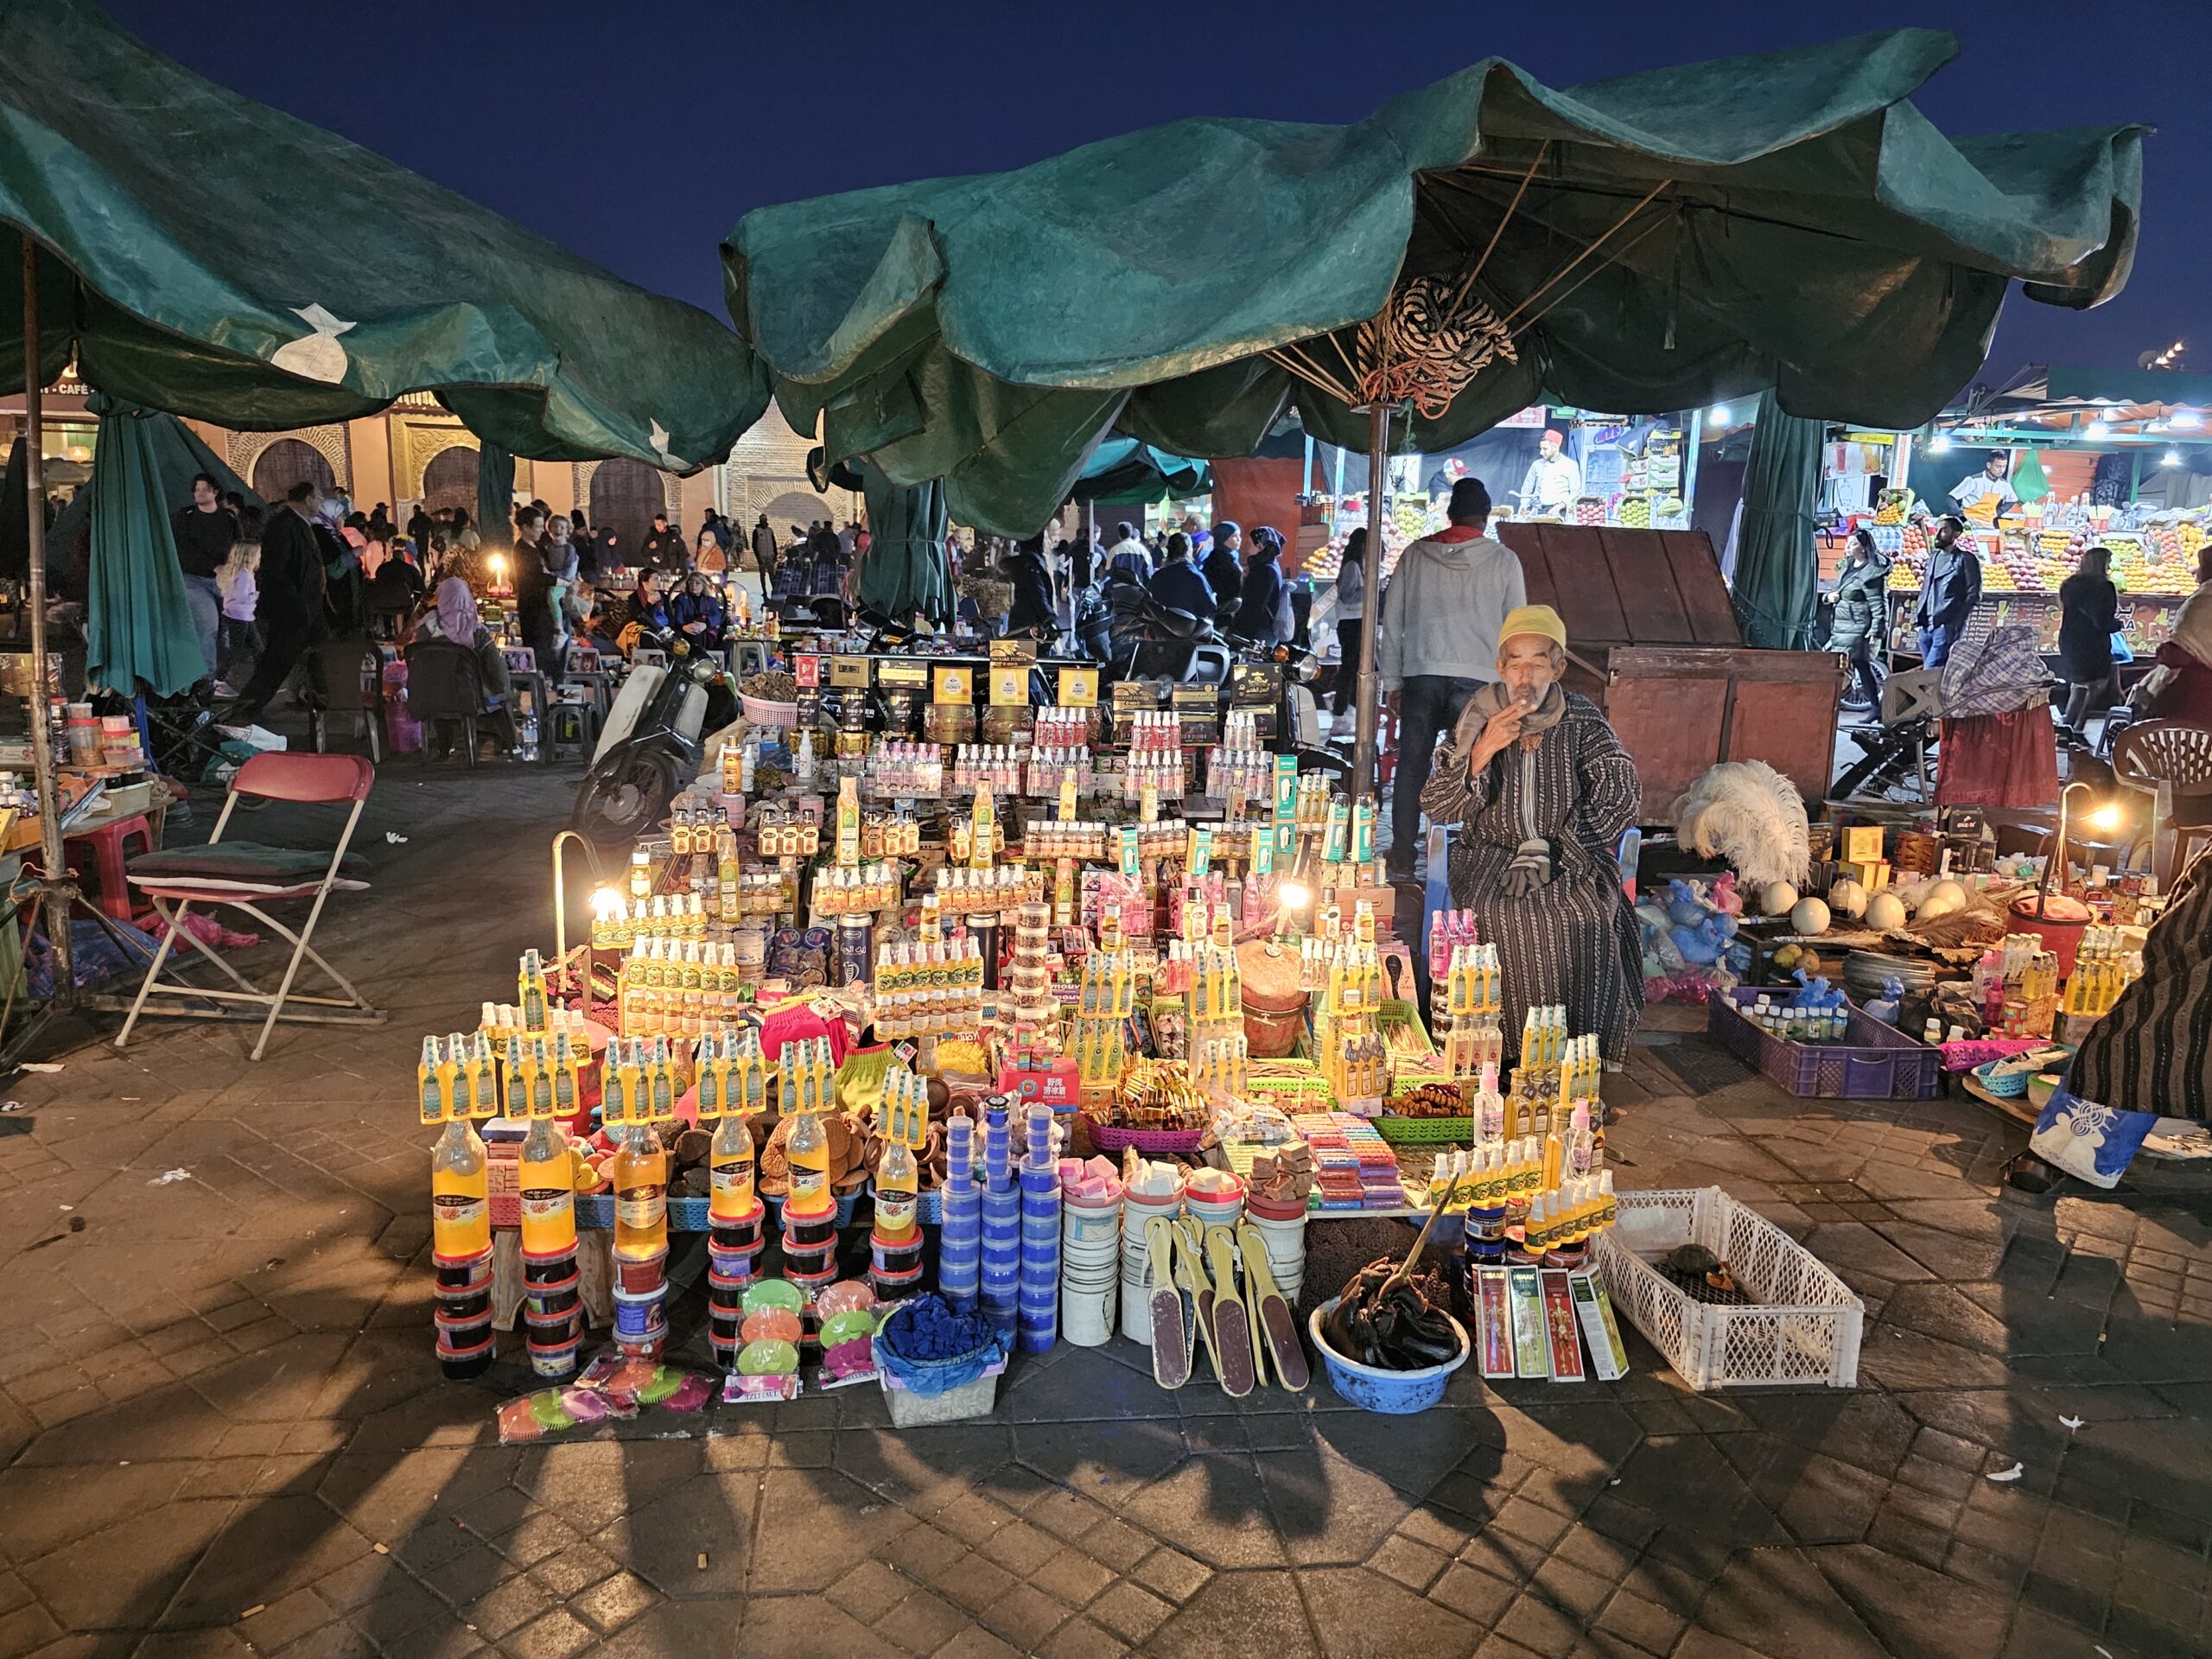 A stall with vender sitting next to it selling Argan Oil, Jemaa El Fnaa, Marrakesh. Image by 360onhistory.com